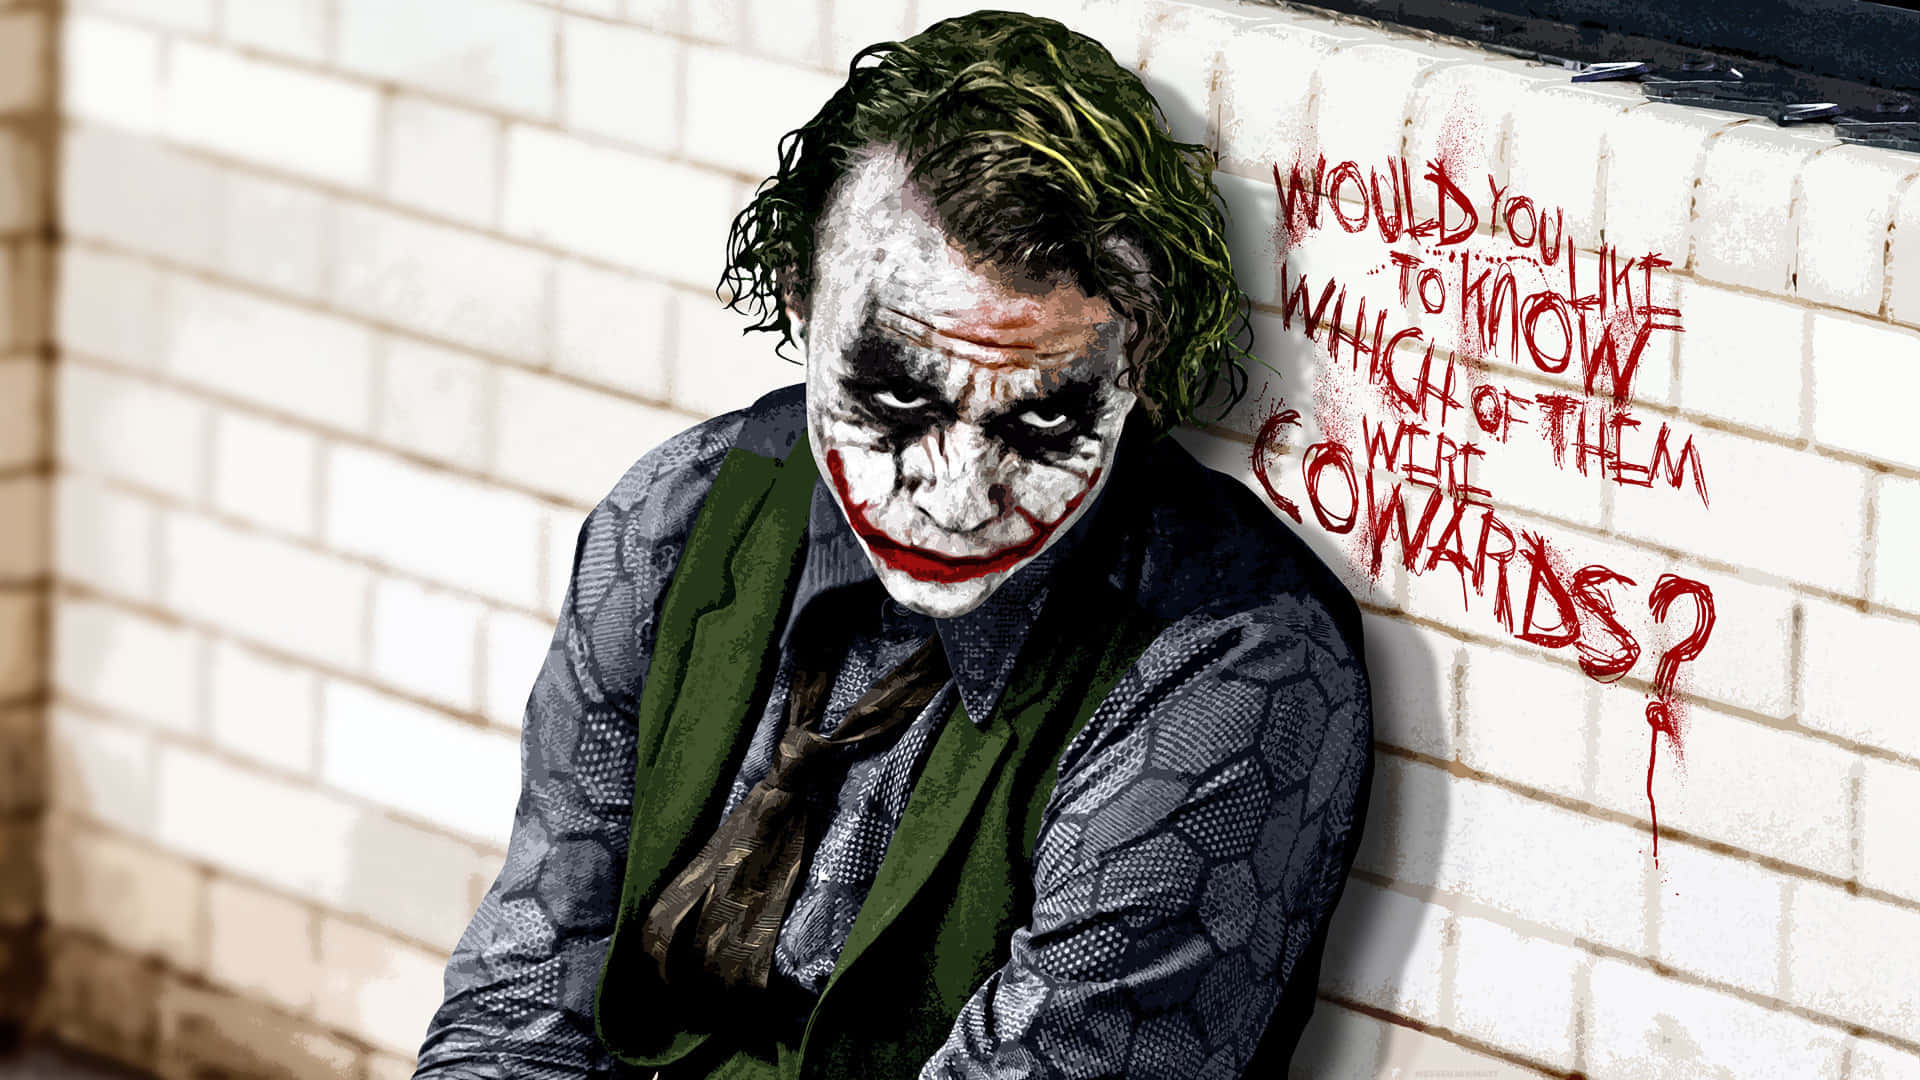 The iconic image of the Joker from the 2008 award-winning movie "The Dark Knight" Wallpaper